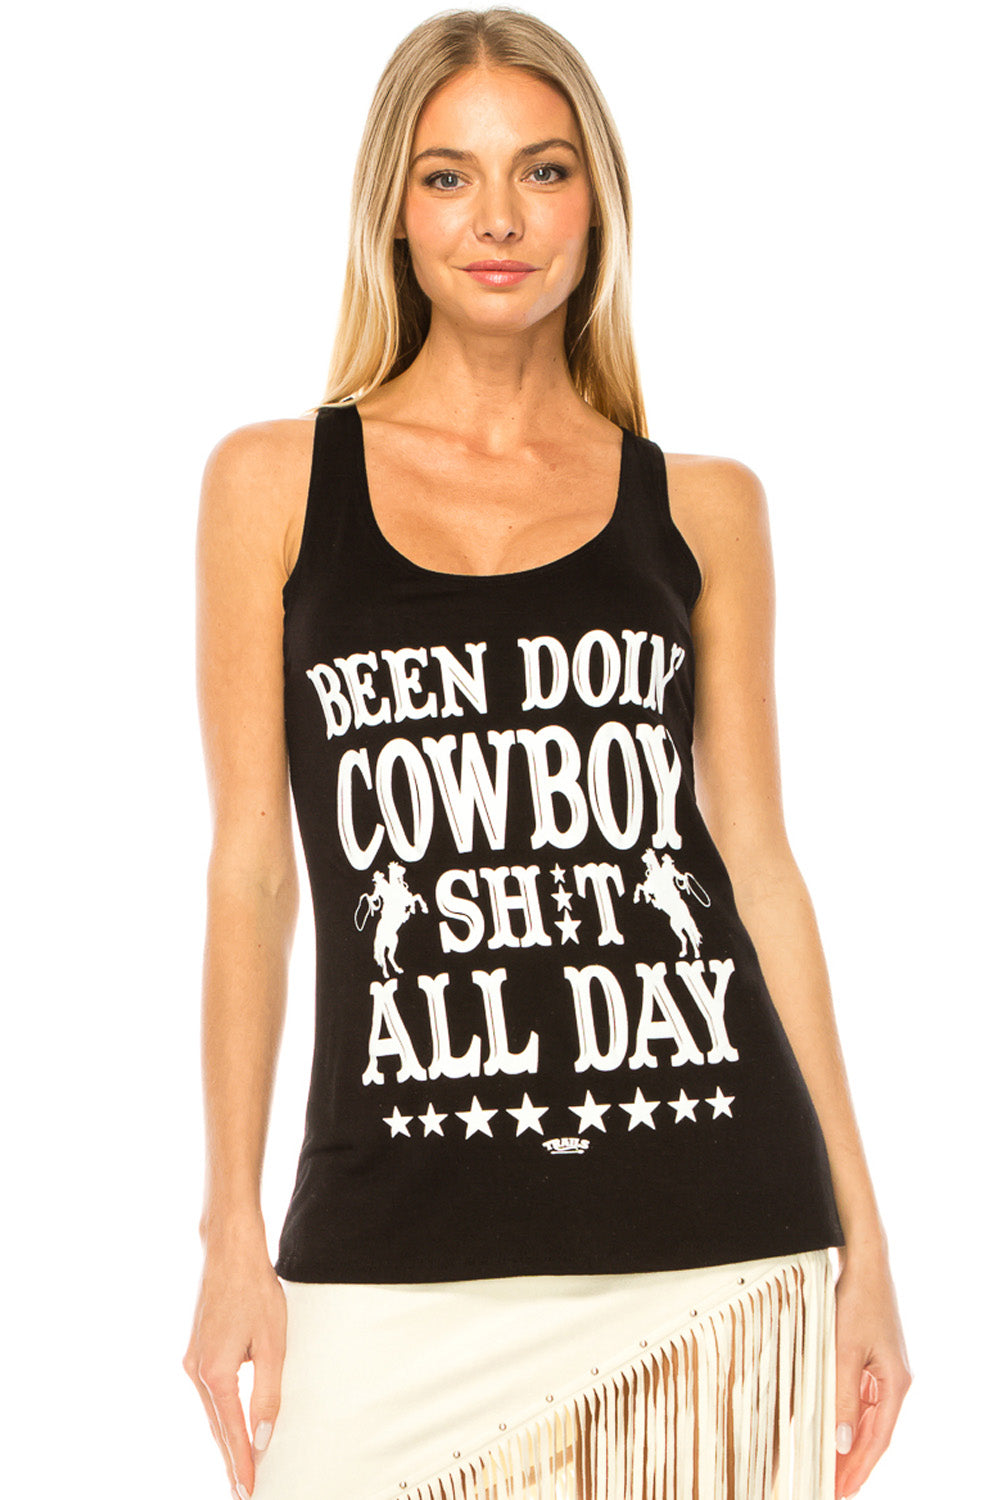 BEEN DOING COWBOY SHIT ALL DAY - Trailsclothing.com